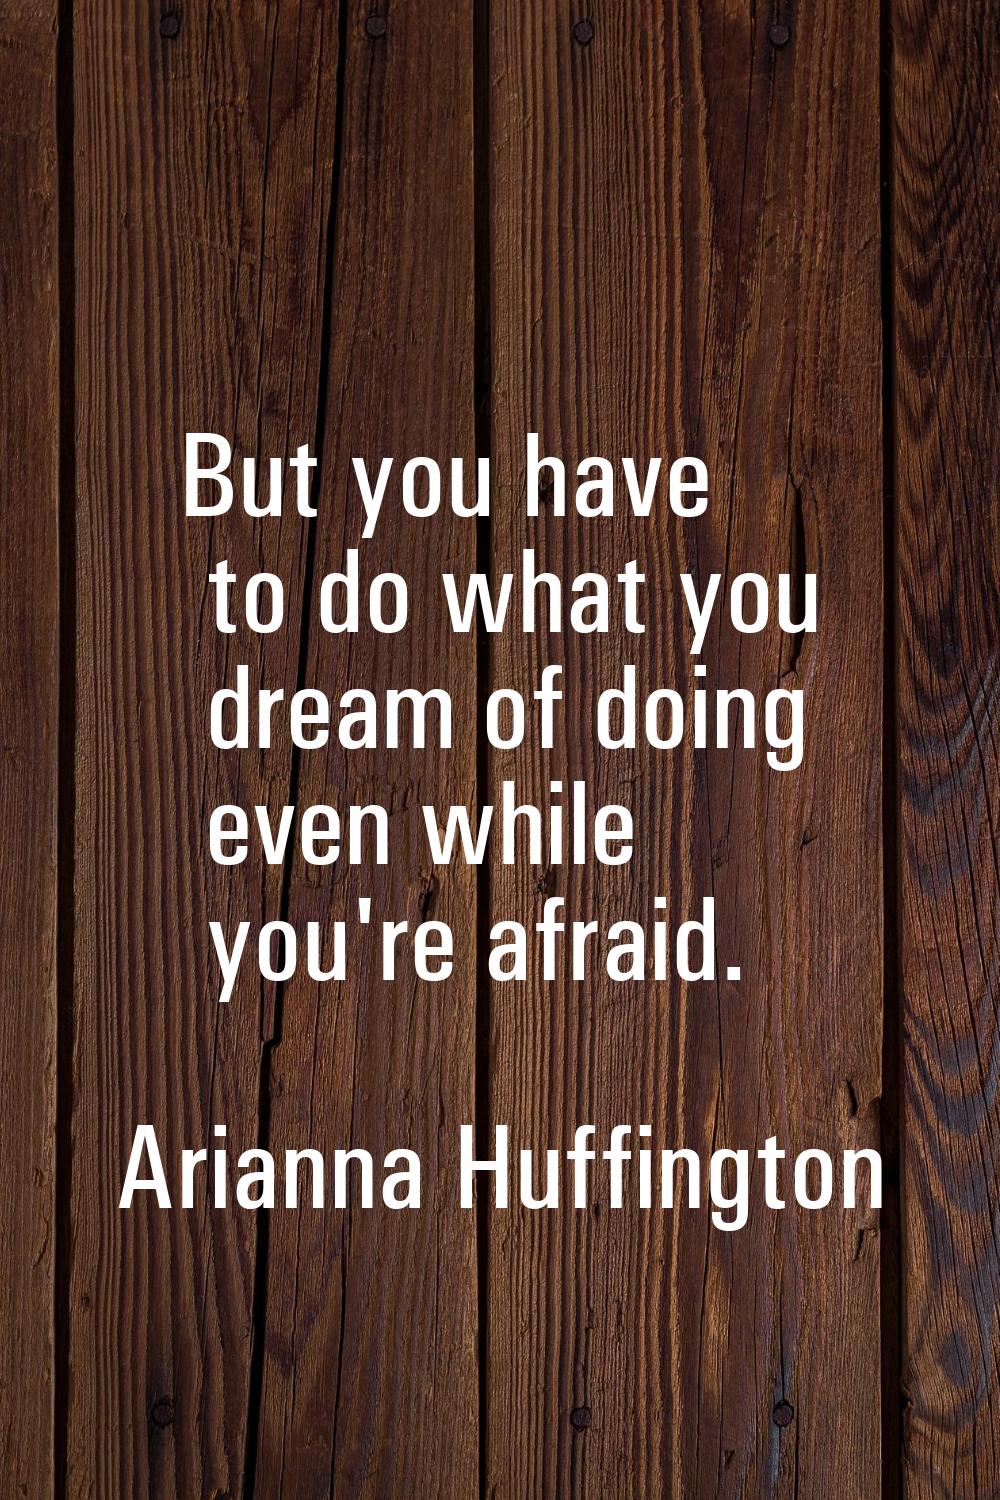 But you have to do what you dream of doing even while you're afraid.